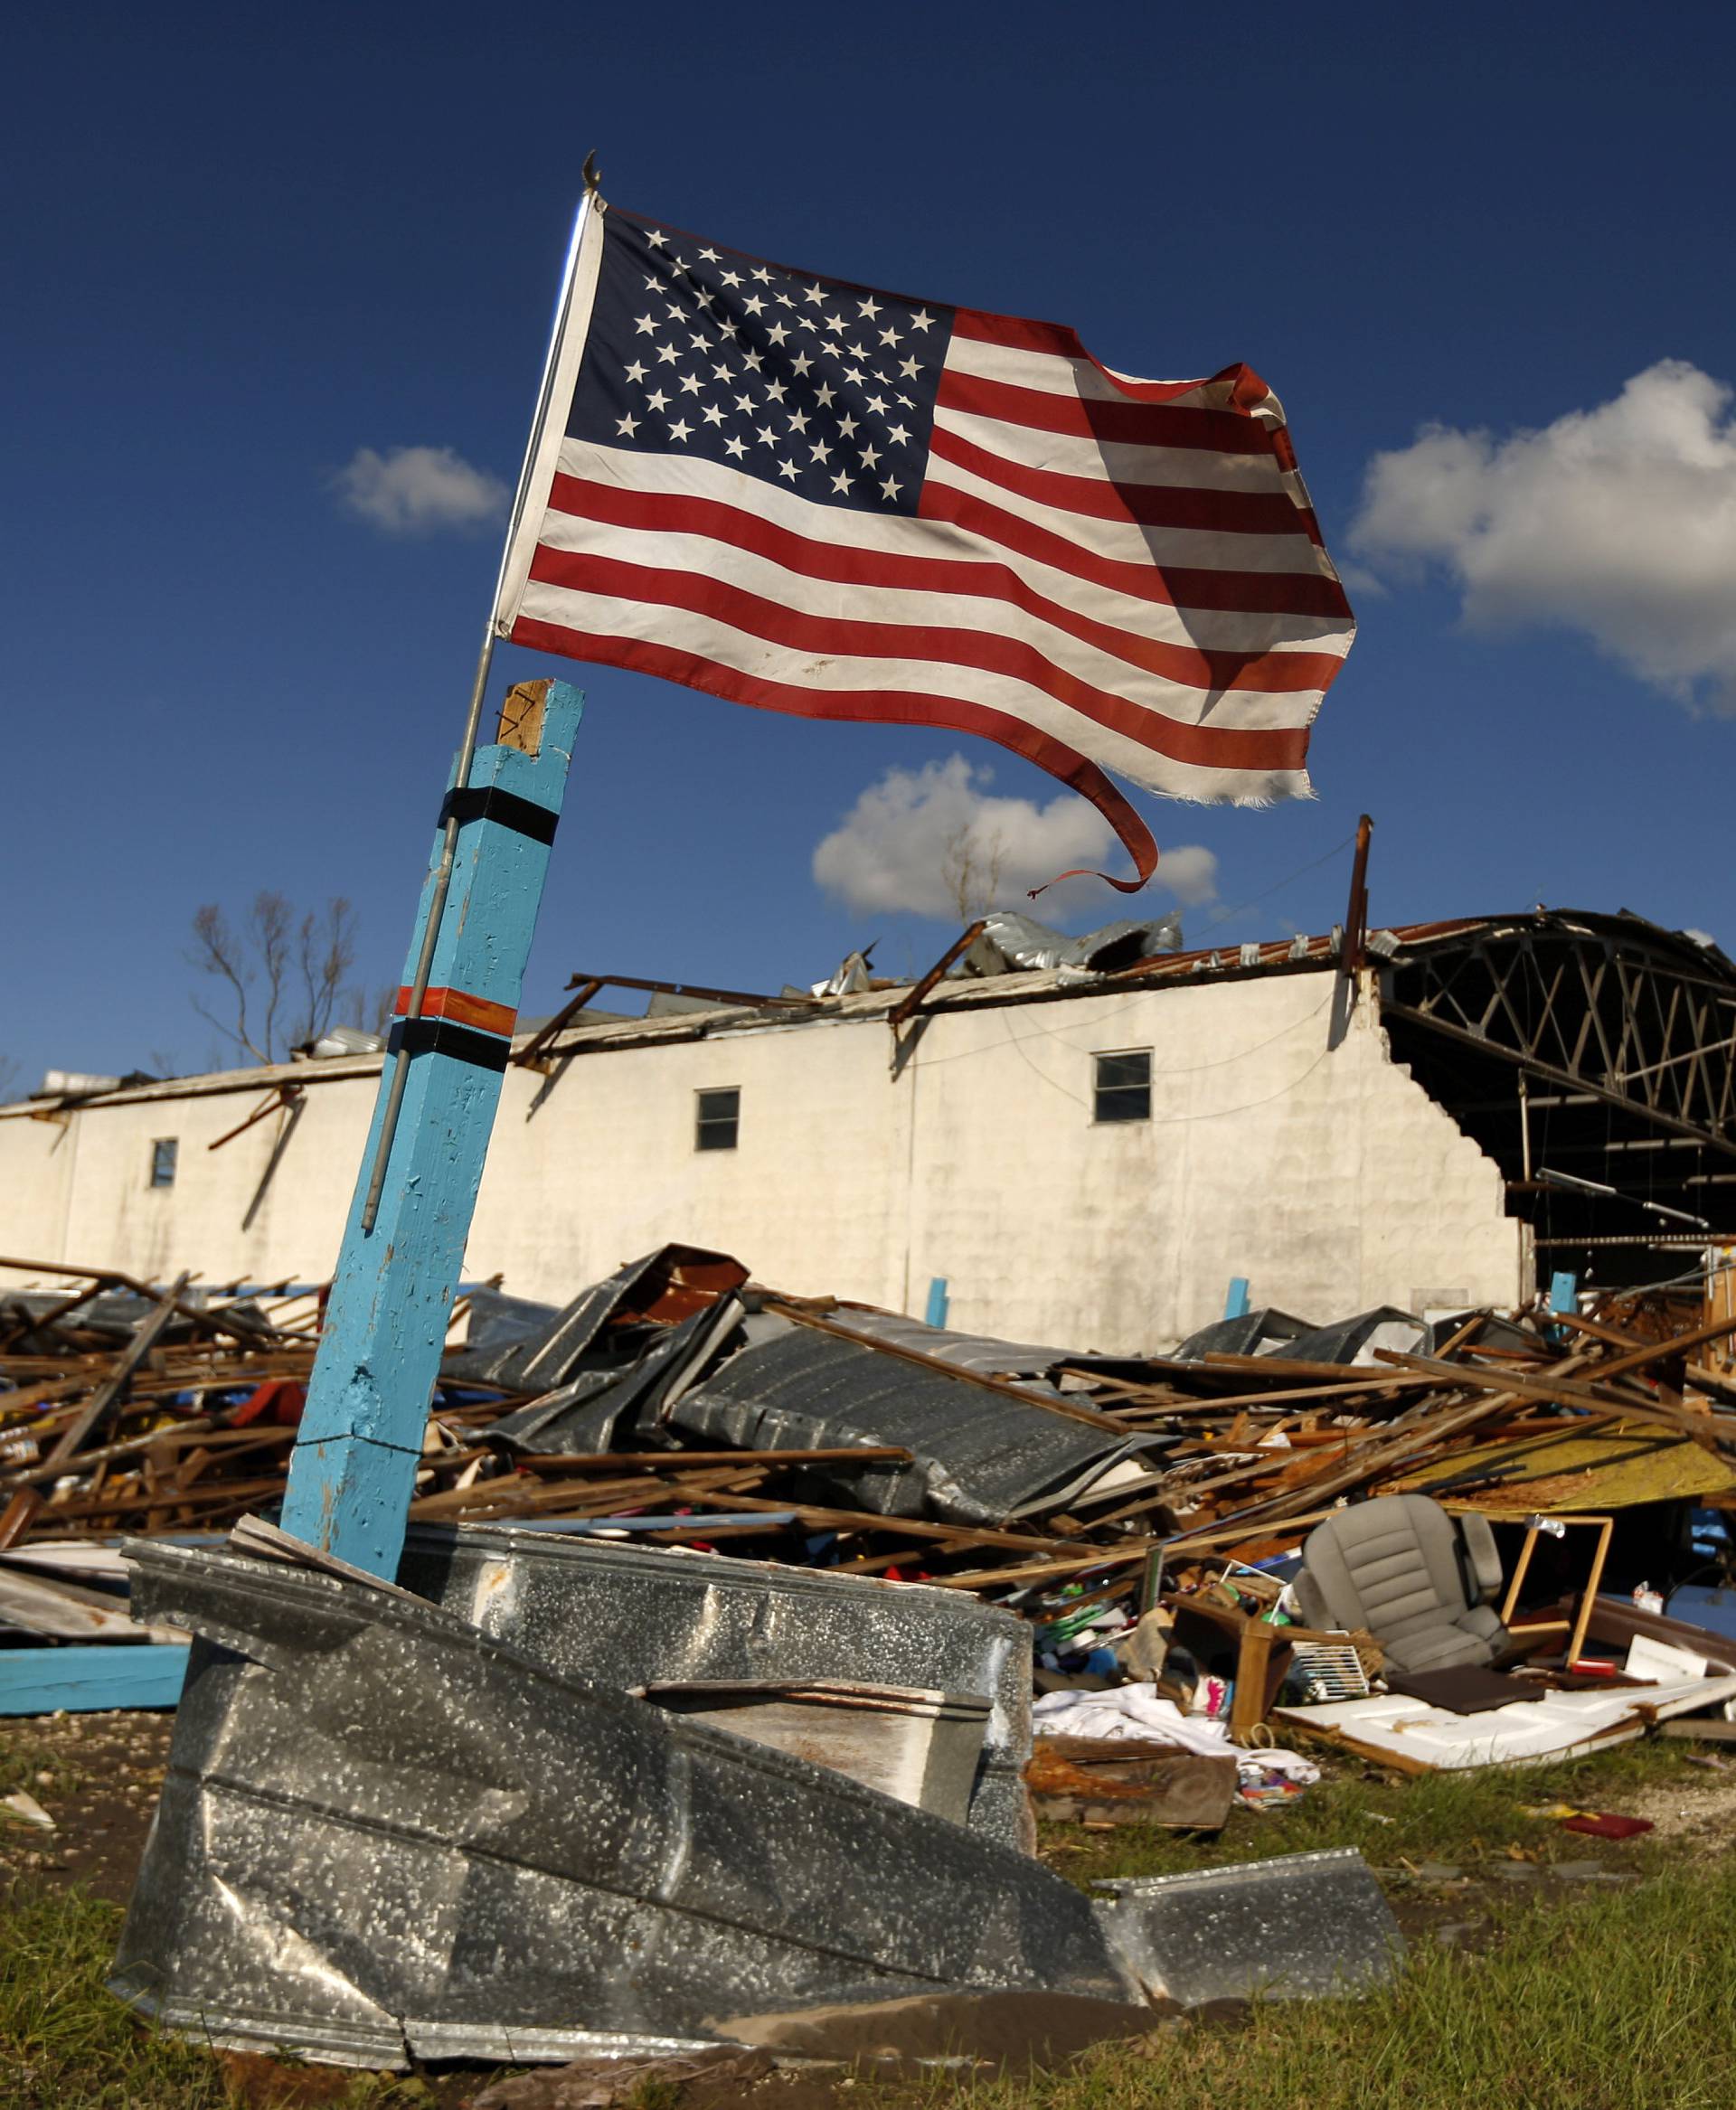 A U.S. flag flies in front of a building damaged by Hurricane Michael in Panama City